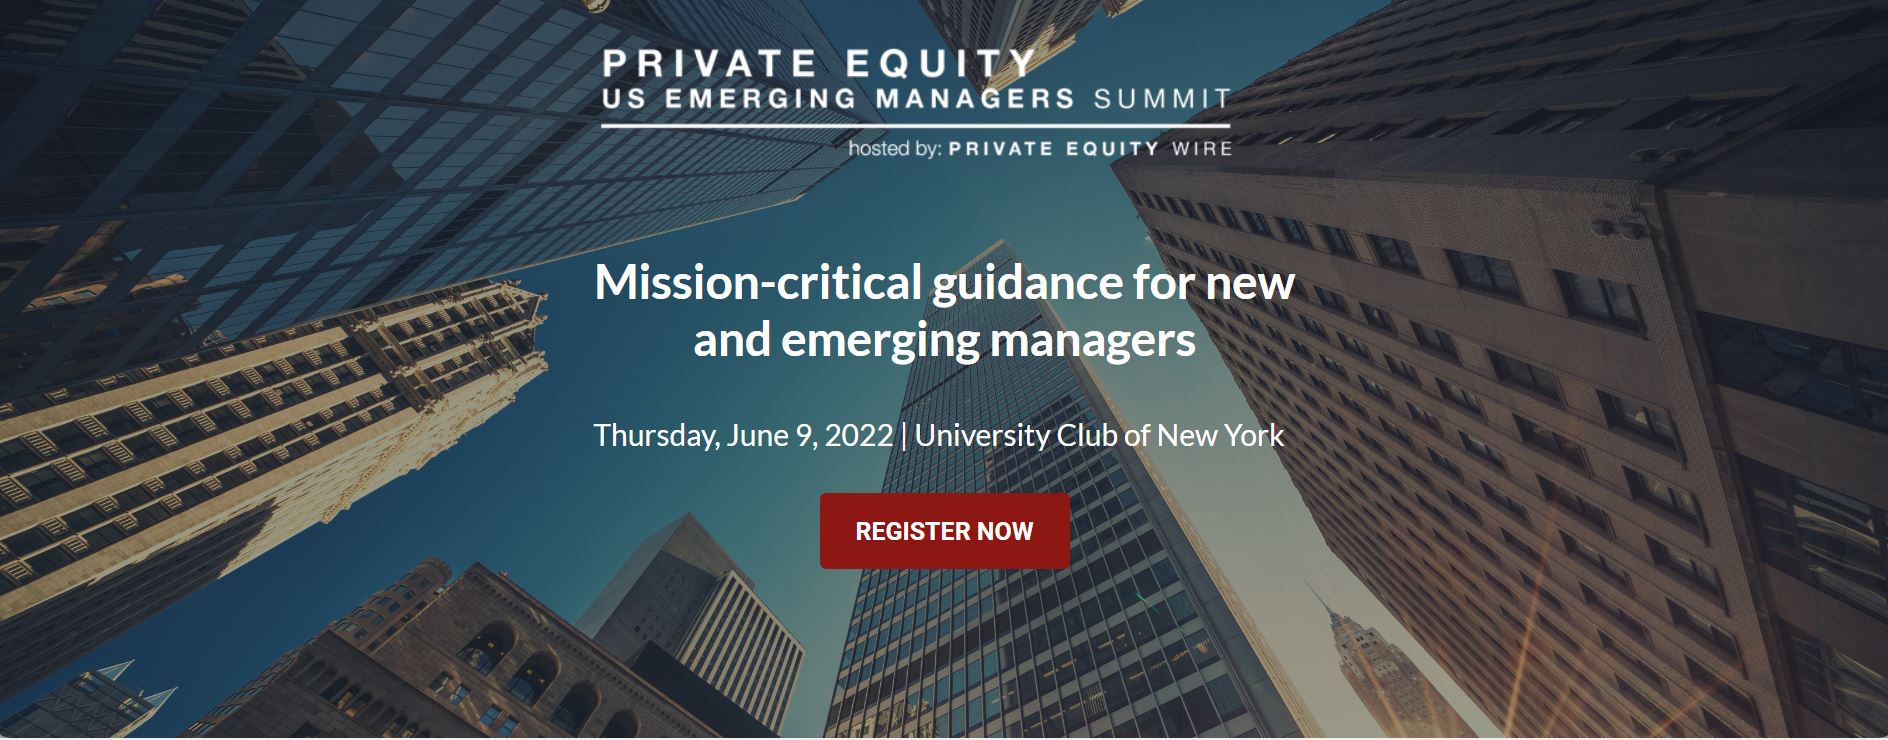 Private Equity Manager Summit